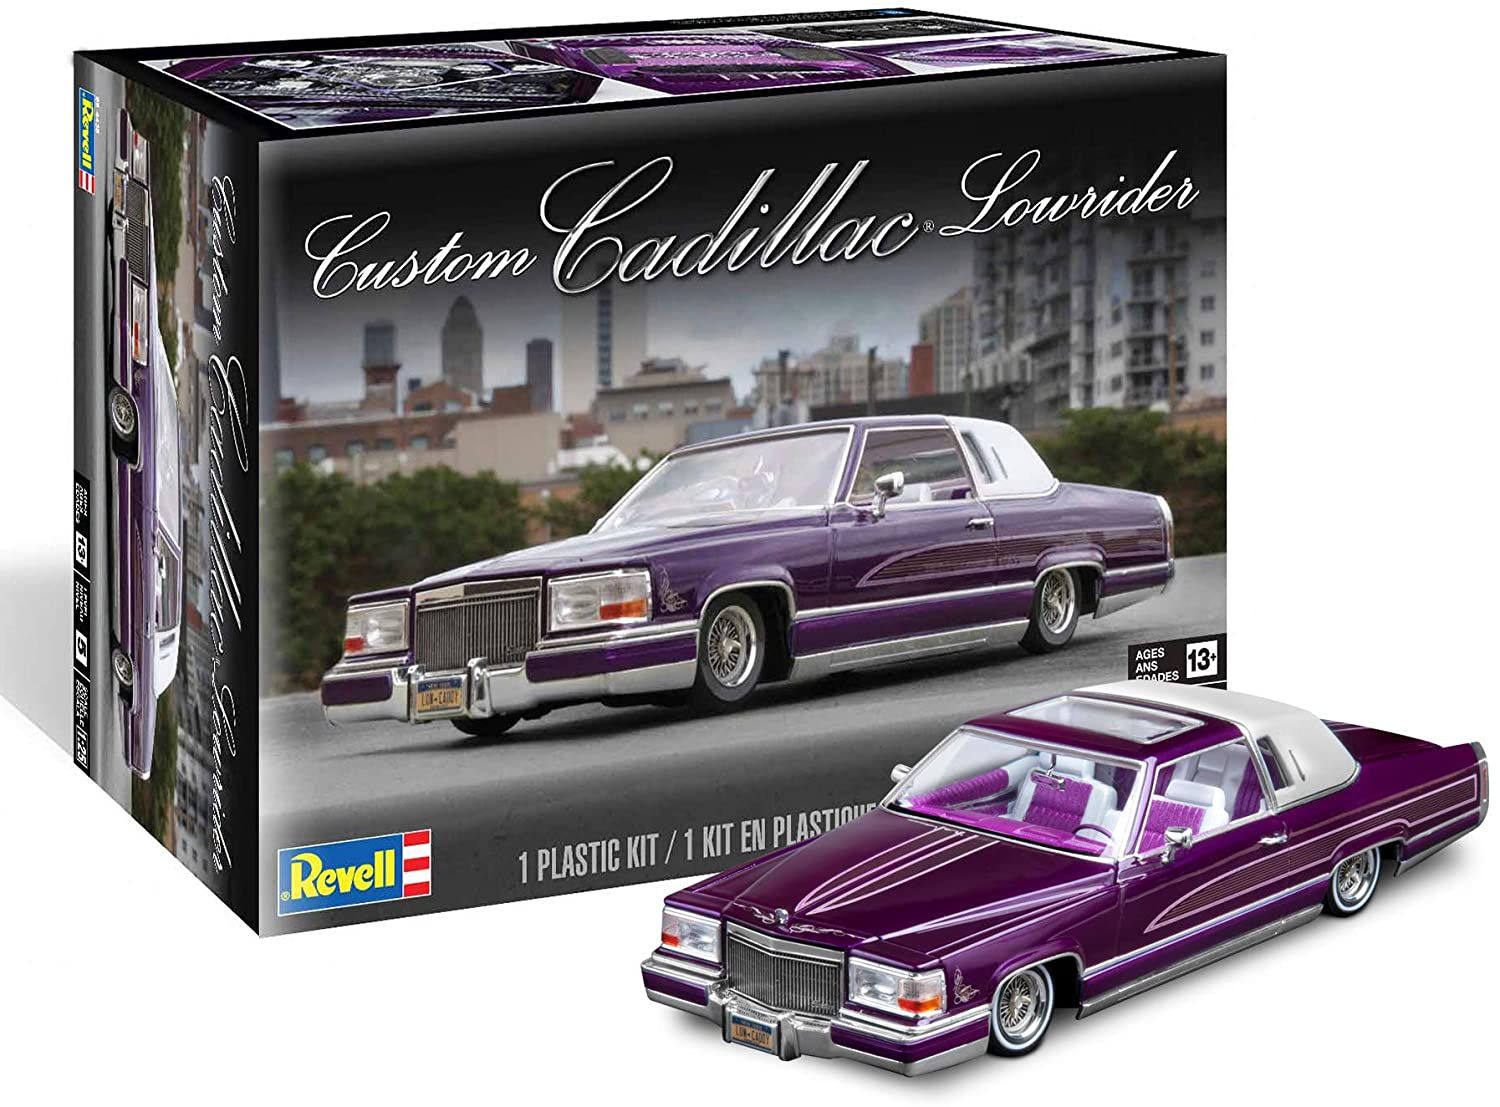 Revell 1/25 Scale Custom Cadillac Lowrider Plastic Model Kit - Click Image to Close